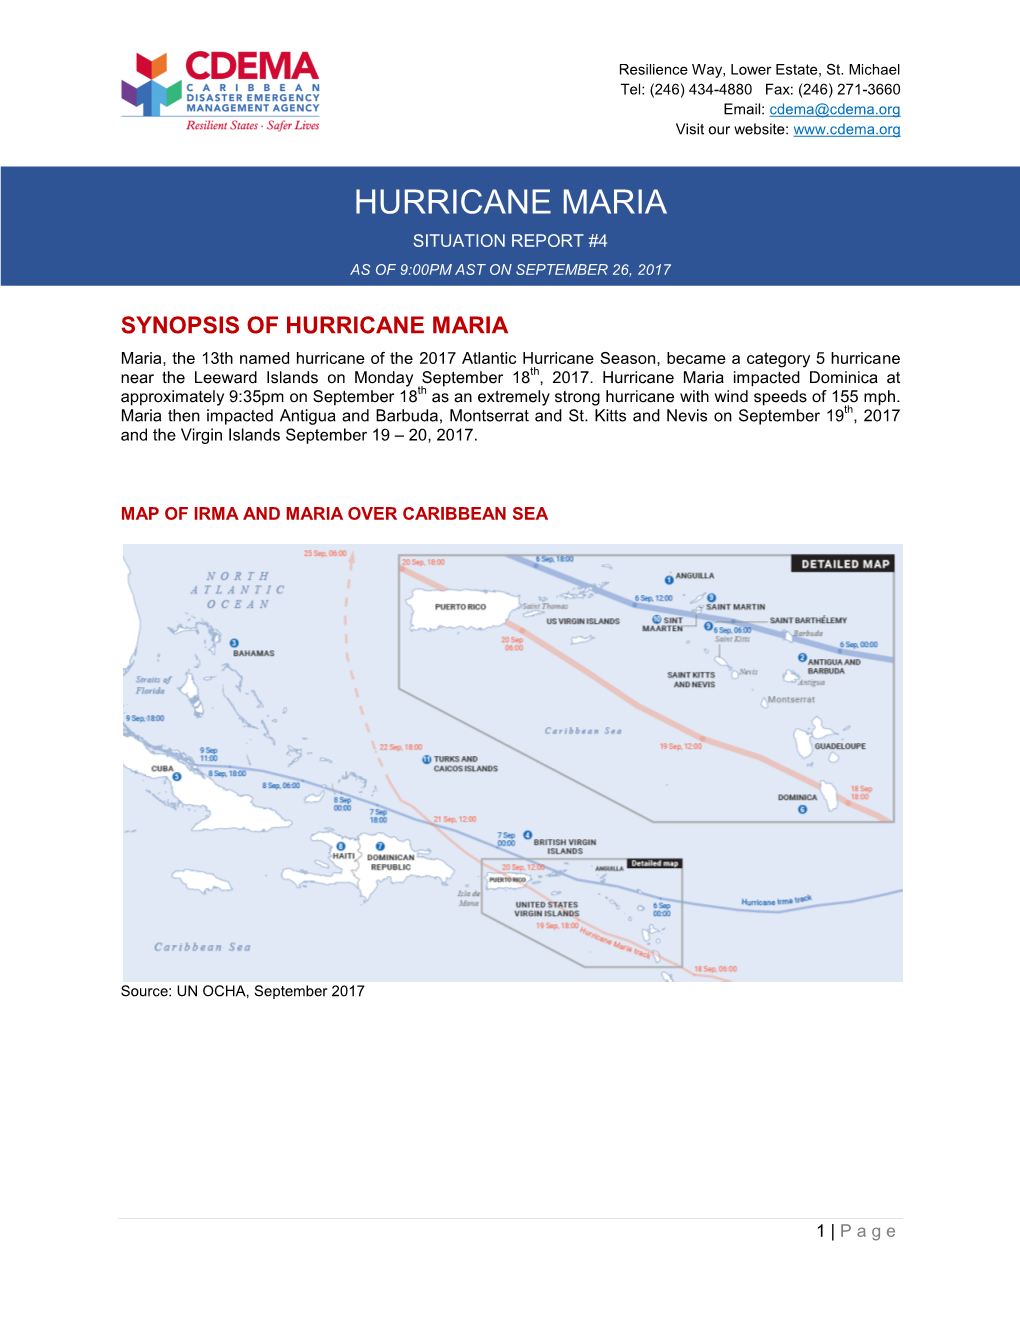 Hurricane Maria Situation Report #4 As of 9:00Pm Ast on September 26, 2017